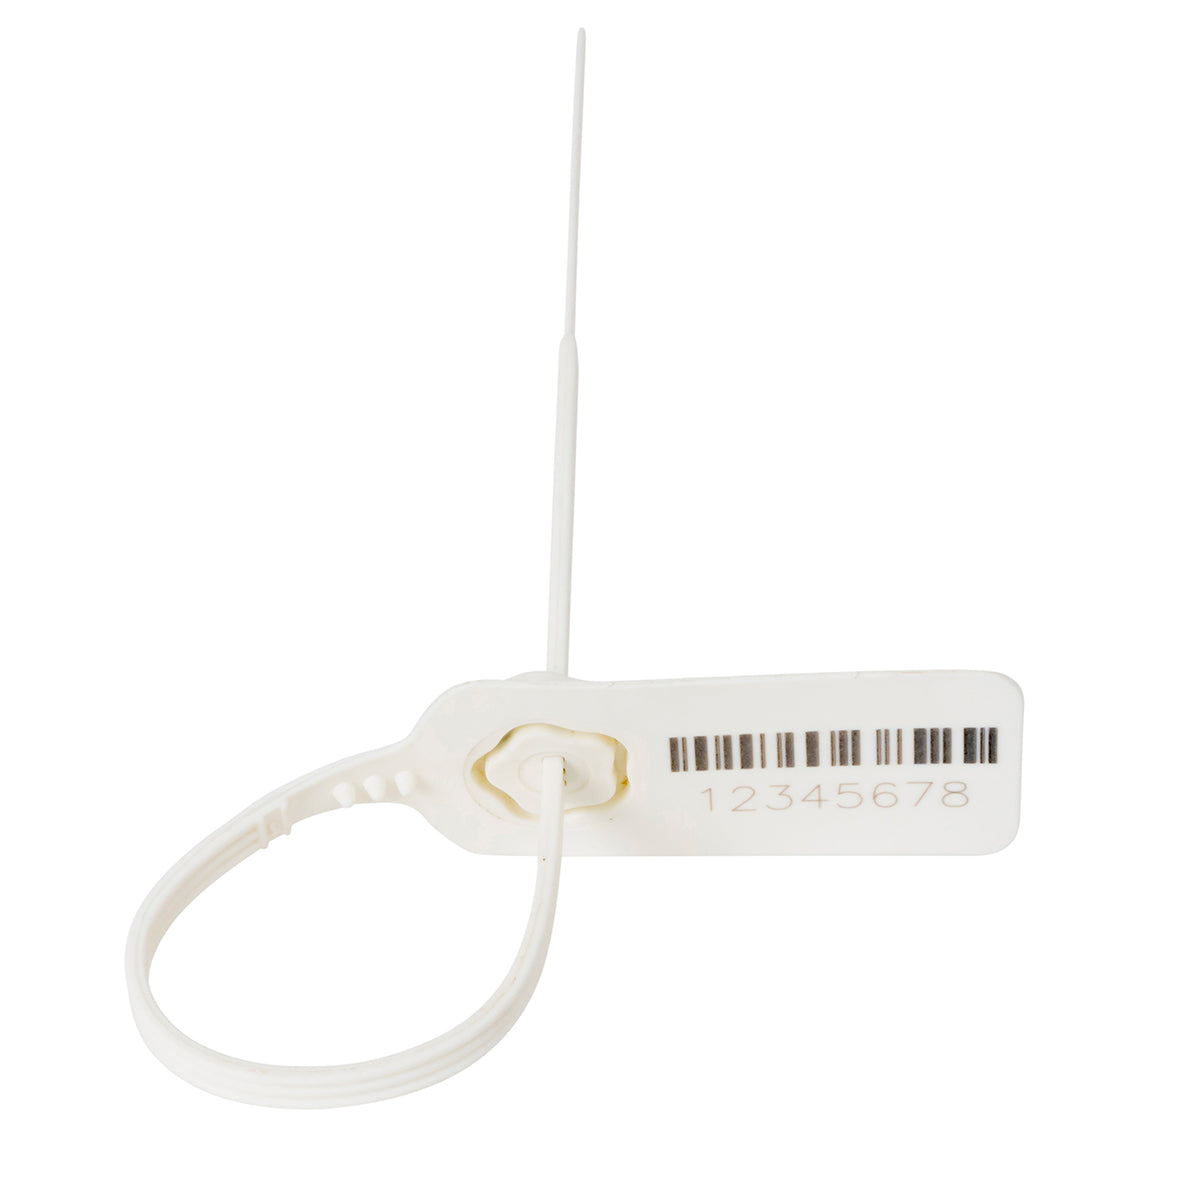 VersaLock - Variable Length Security Seal (White)